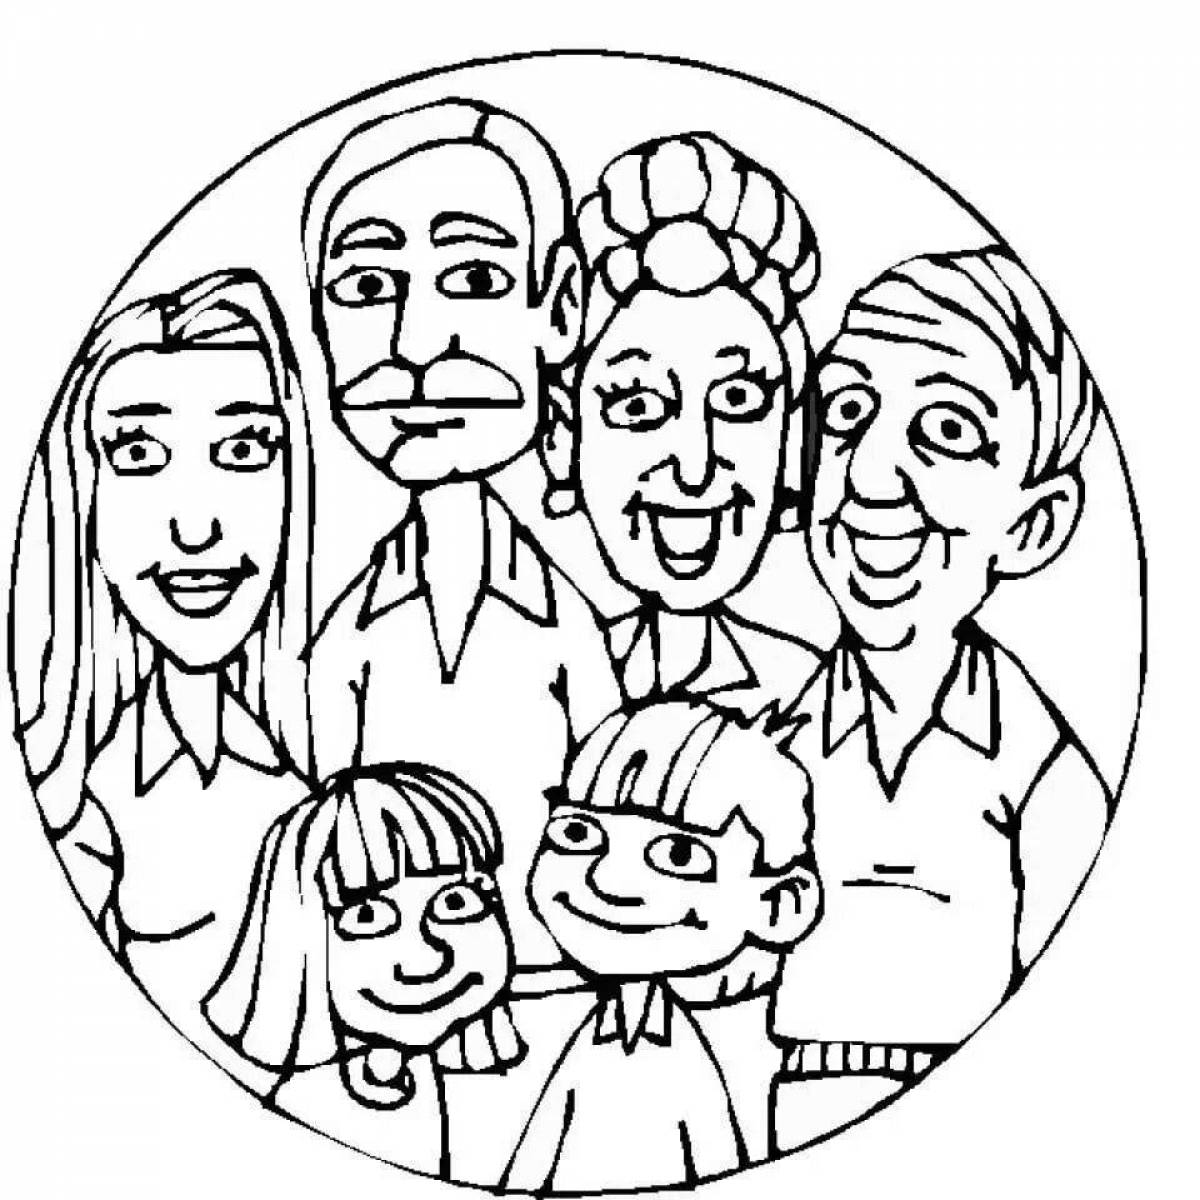 Content family coloring page